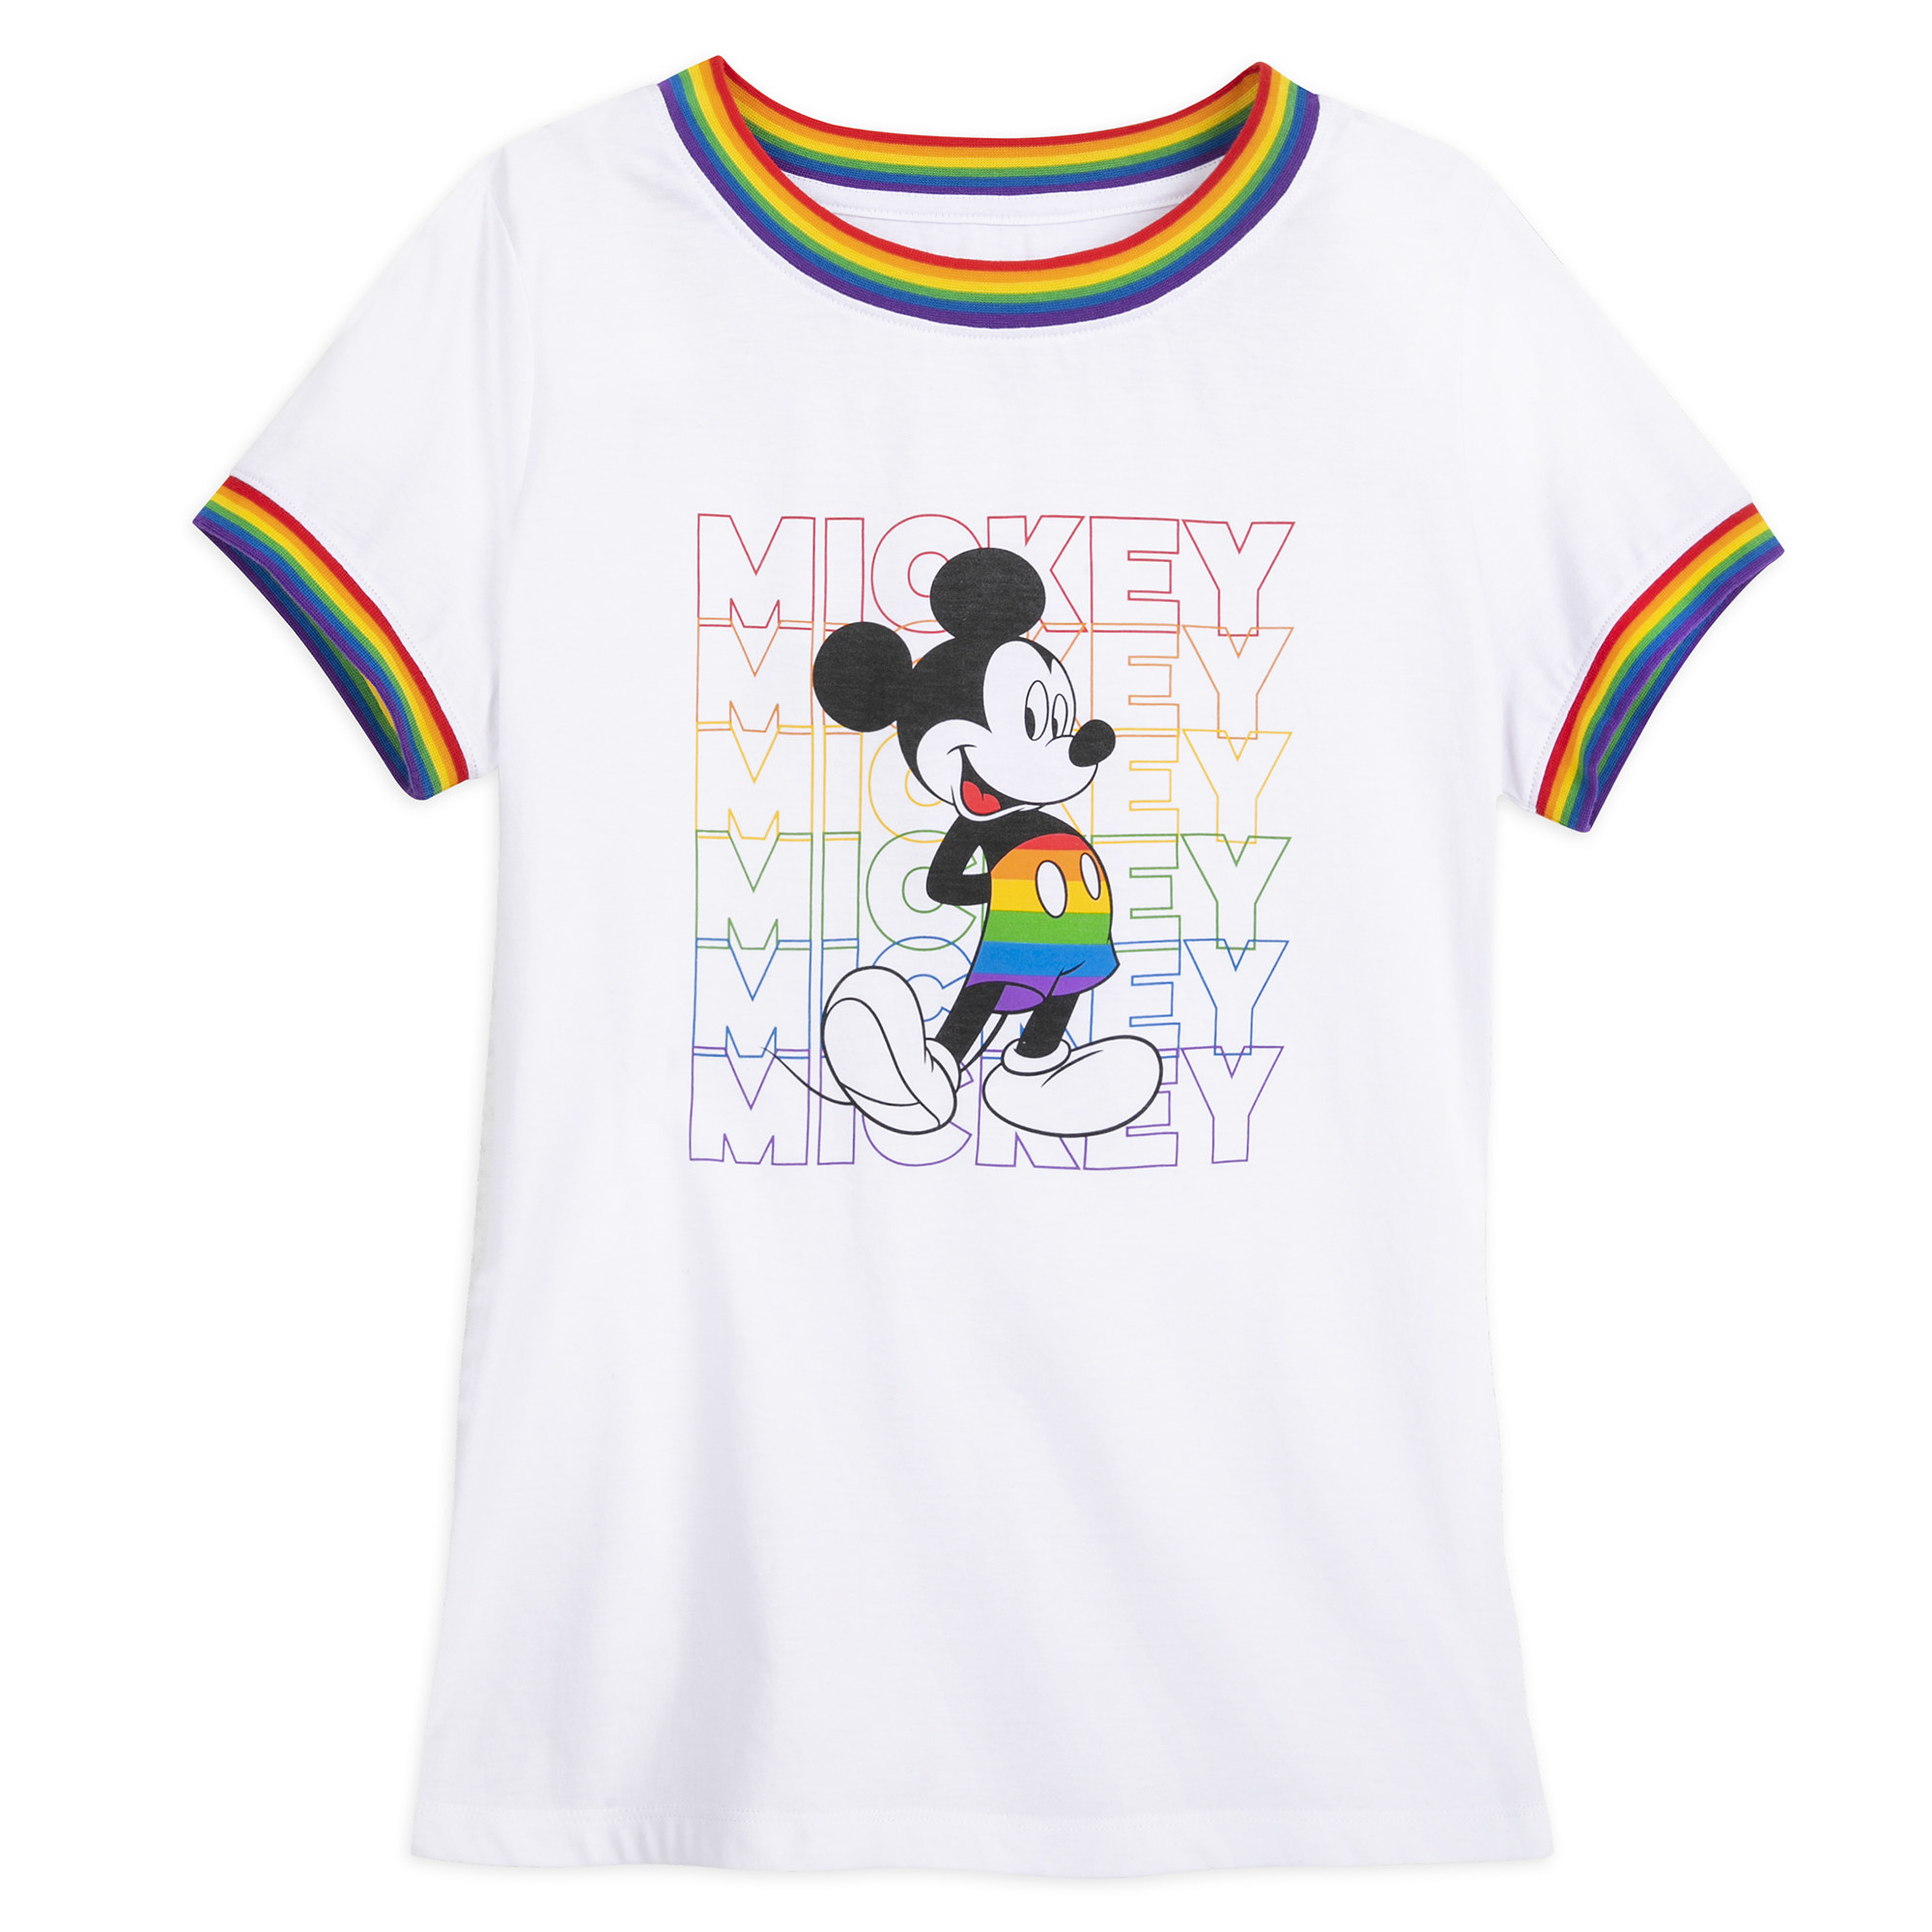 The Rainbow Disney Collection For Pride Is Here And It's A Lovely 